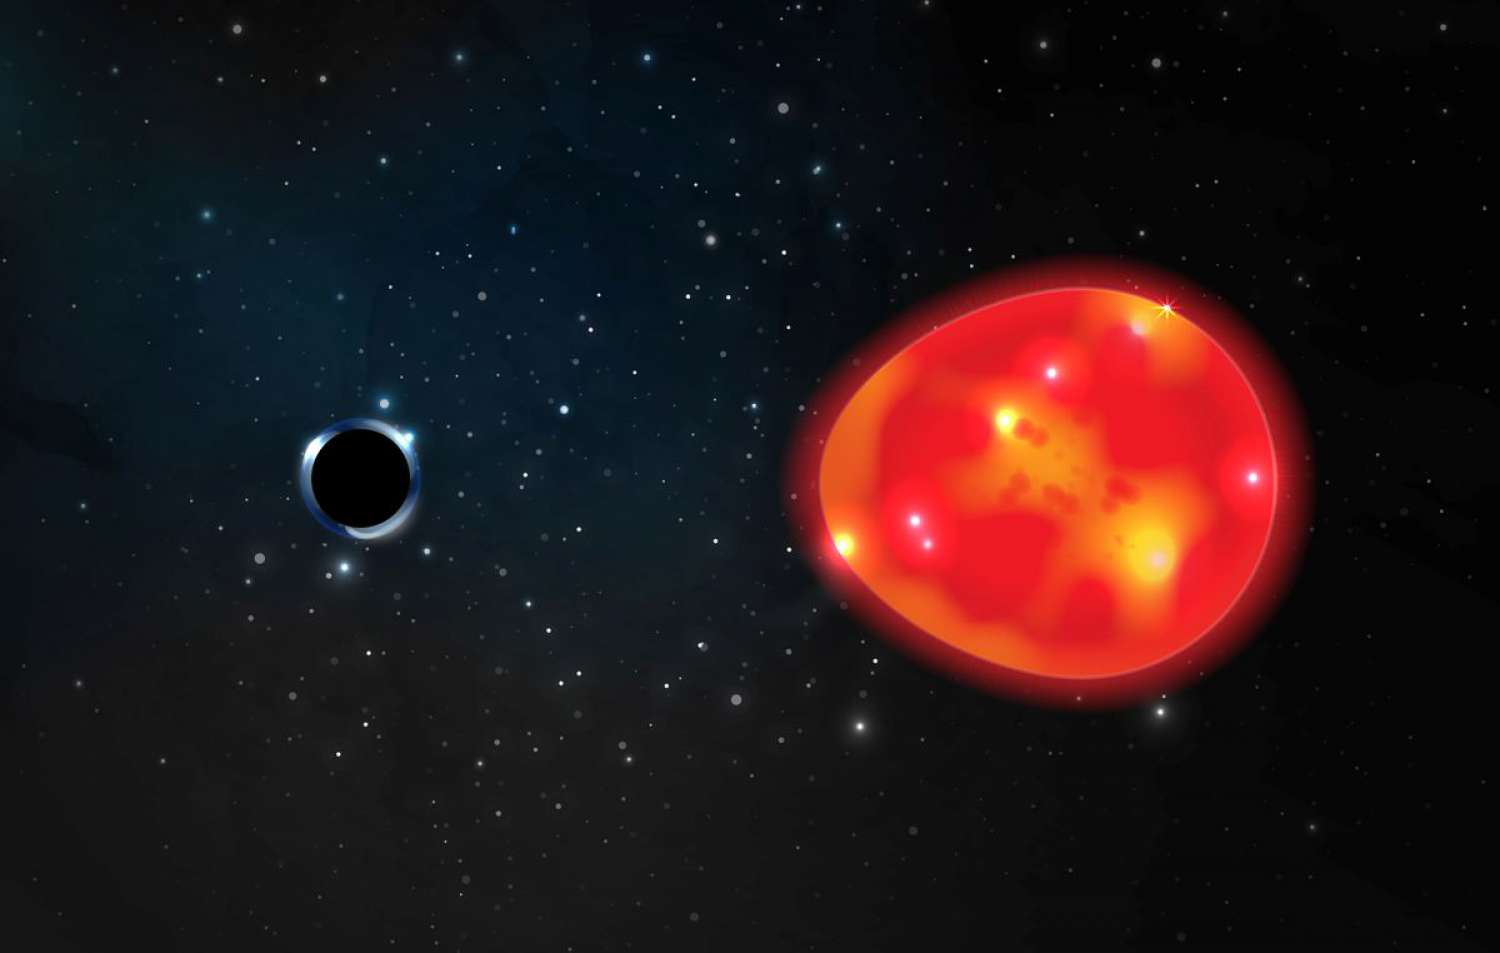 unicorn black hole and red giant star